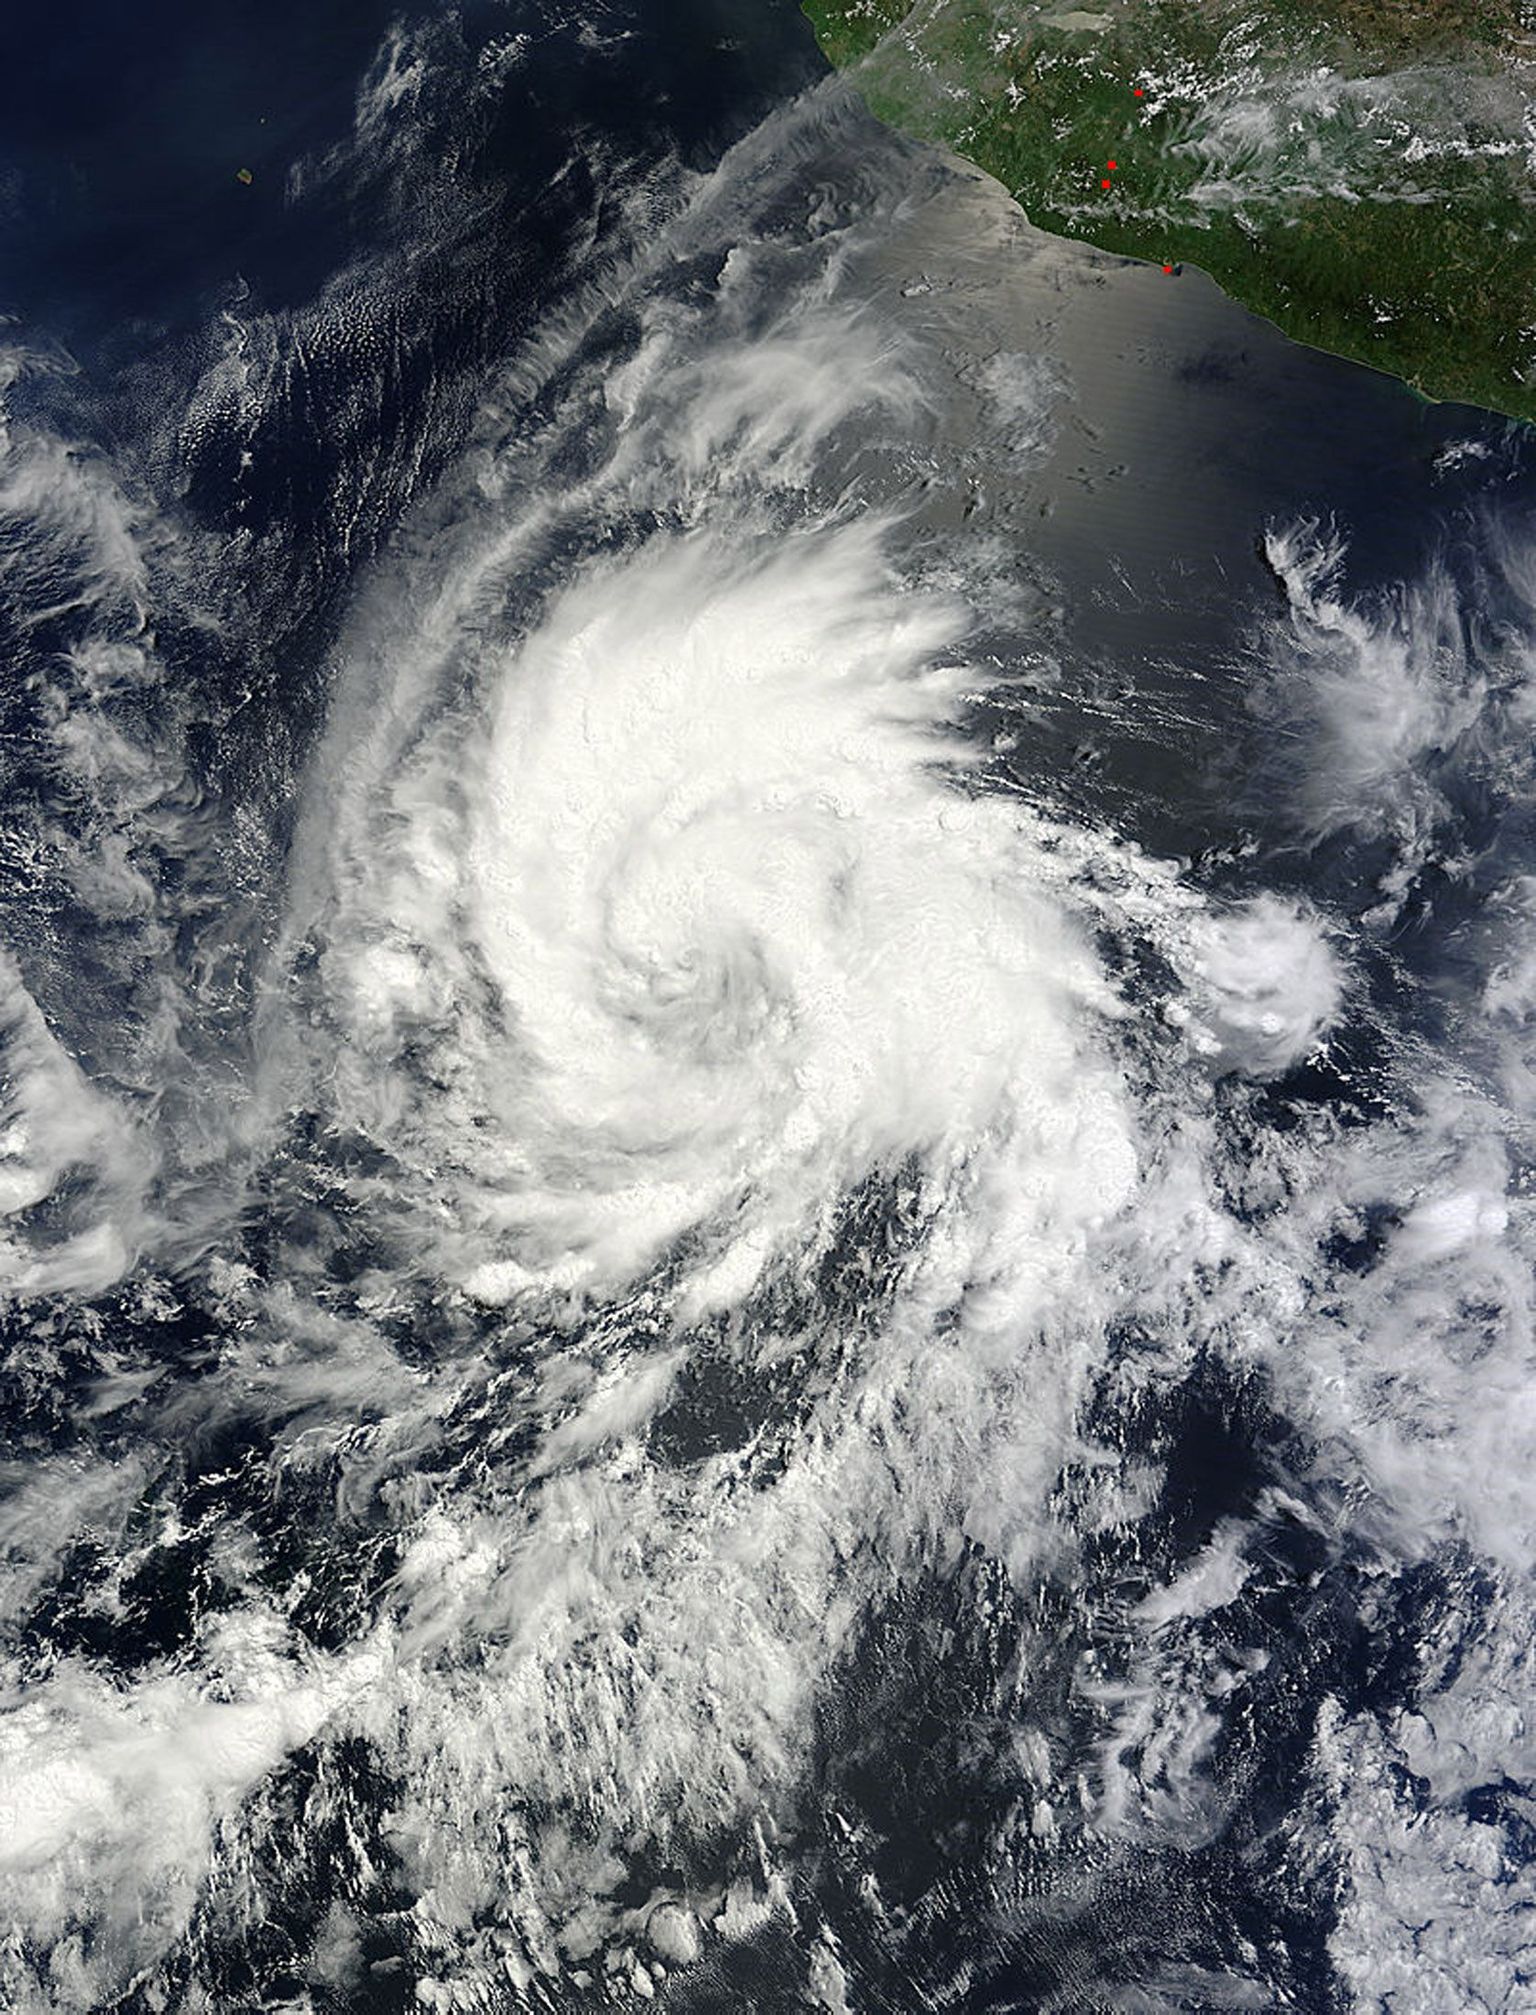 Hurricane Emilia is pictured in the eastern Pacific Ocean when still designated a tropical storm in this July 8, 2012 NASA handout satellite image.Emilia's maximum sustained winds were near 100 mph (160 kmh) and the National Hurricane Center noted that she could become a major hurricane (Category Three) later July 9, 2012. Emilia was located about 710 miles (1145 km) south of the southern tip of Baja California. Emilia is moving at 12 mph (19 kmh) to the west-northwest.   REUTERS/NASA/Handout.     (UNITED STATES - Tags: ENVIRONMENT) THIS IMAGE HAS BEEN SUPPLIED BY A THIRD PARTY. IT IS DISTRIBUTED, EXACTLY AS RECEIVED BY REUTERS, AS A SERVICE TO CLIENTS. FOR EDITORIAL USE ONLY. NOT FOR SALE FOR MARKETING OR ADVERTISING CAMPAIGNS